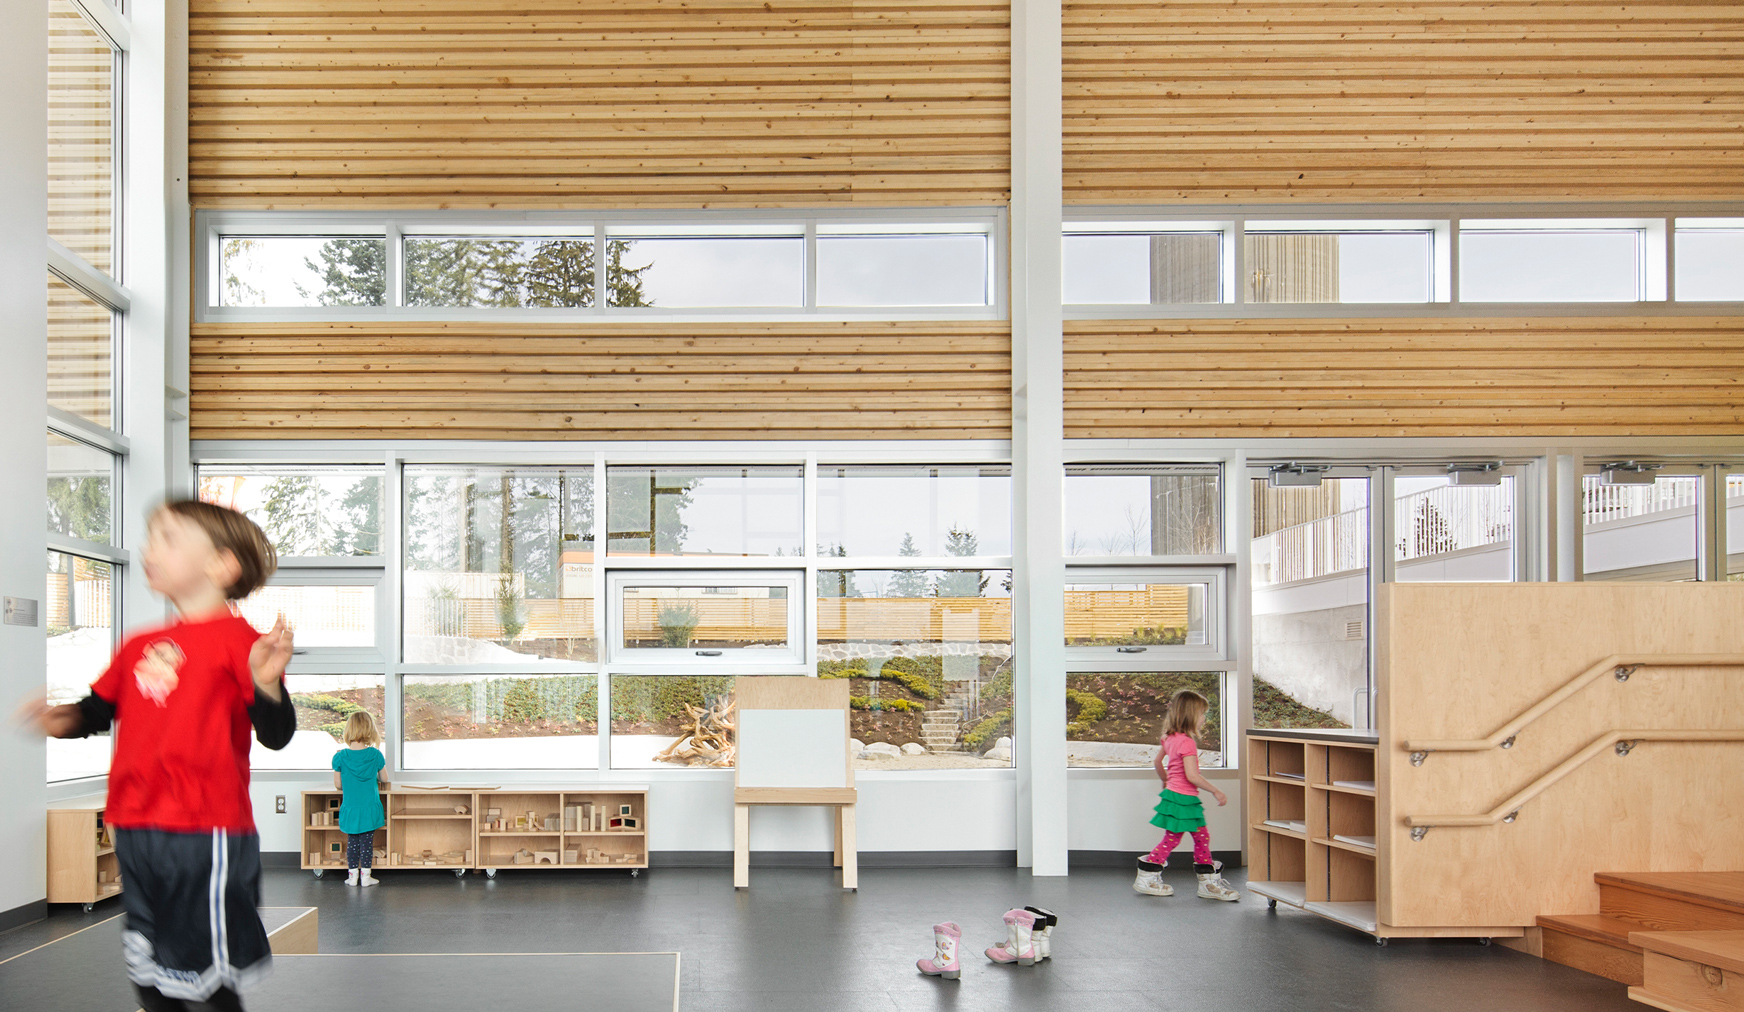 A light wooden interior with lots of windows and children playing.